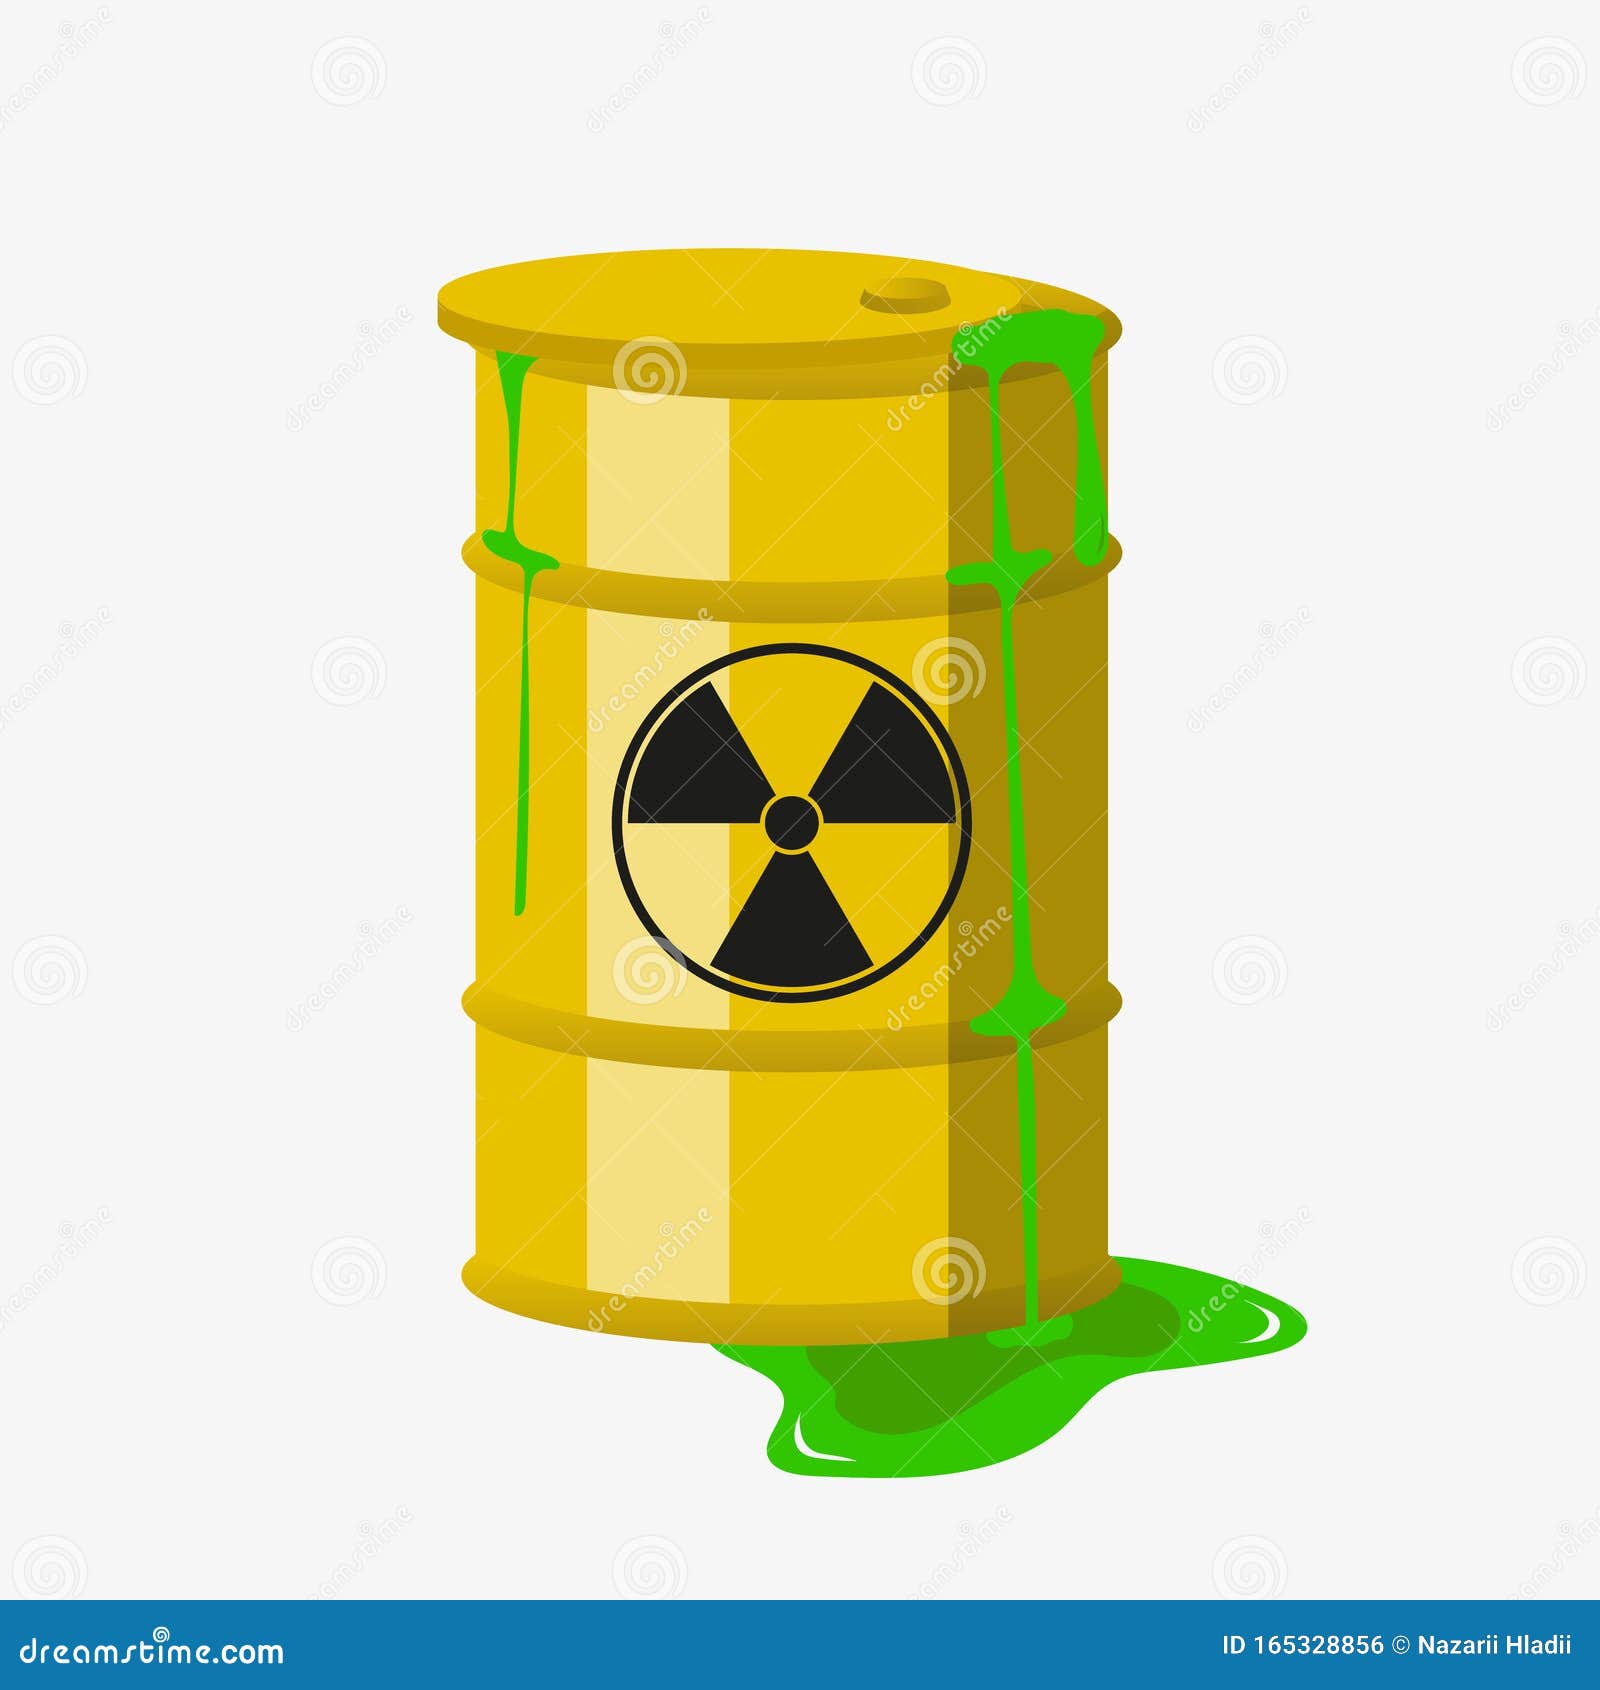 Toxic Waste Cartoon PNG, Clipart, Art, Artwork, Cartoon, Character,  Chemical Substance Free PNG Download